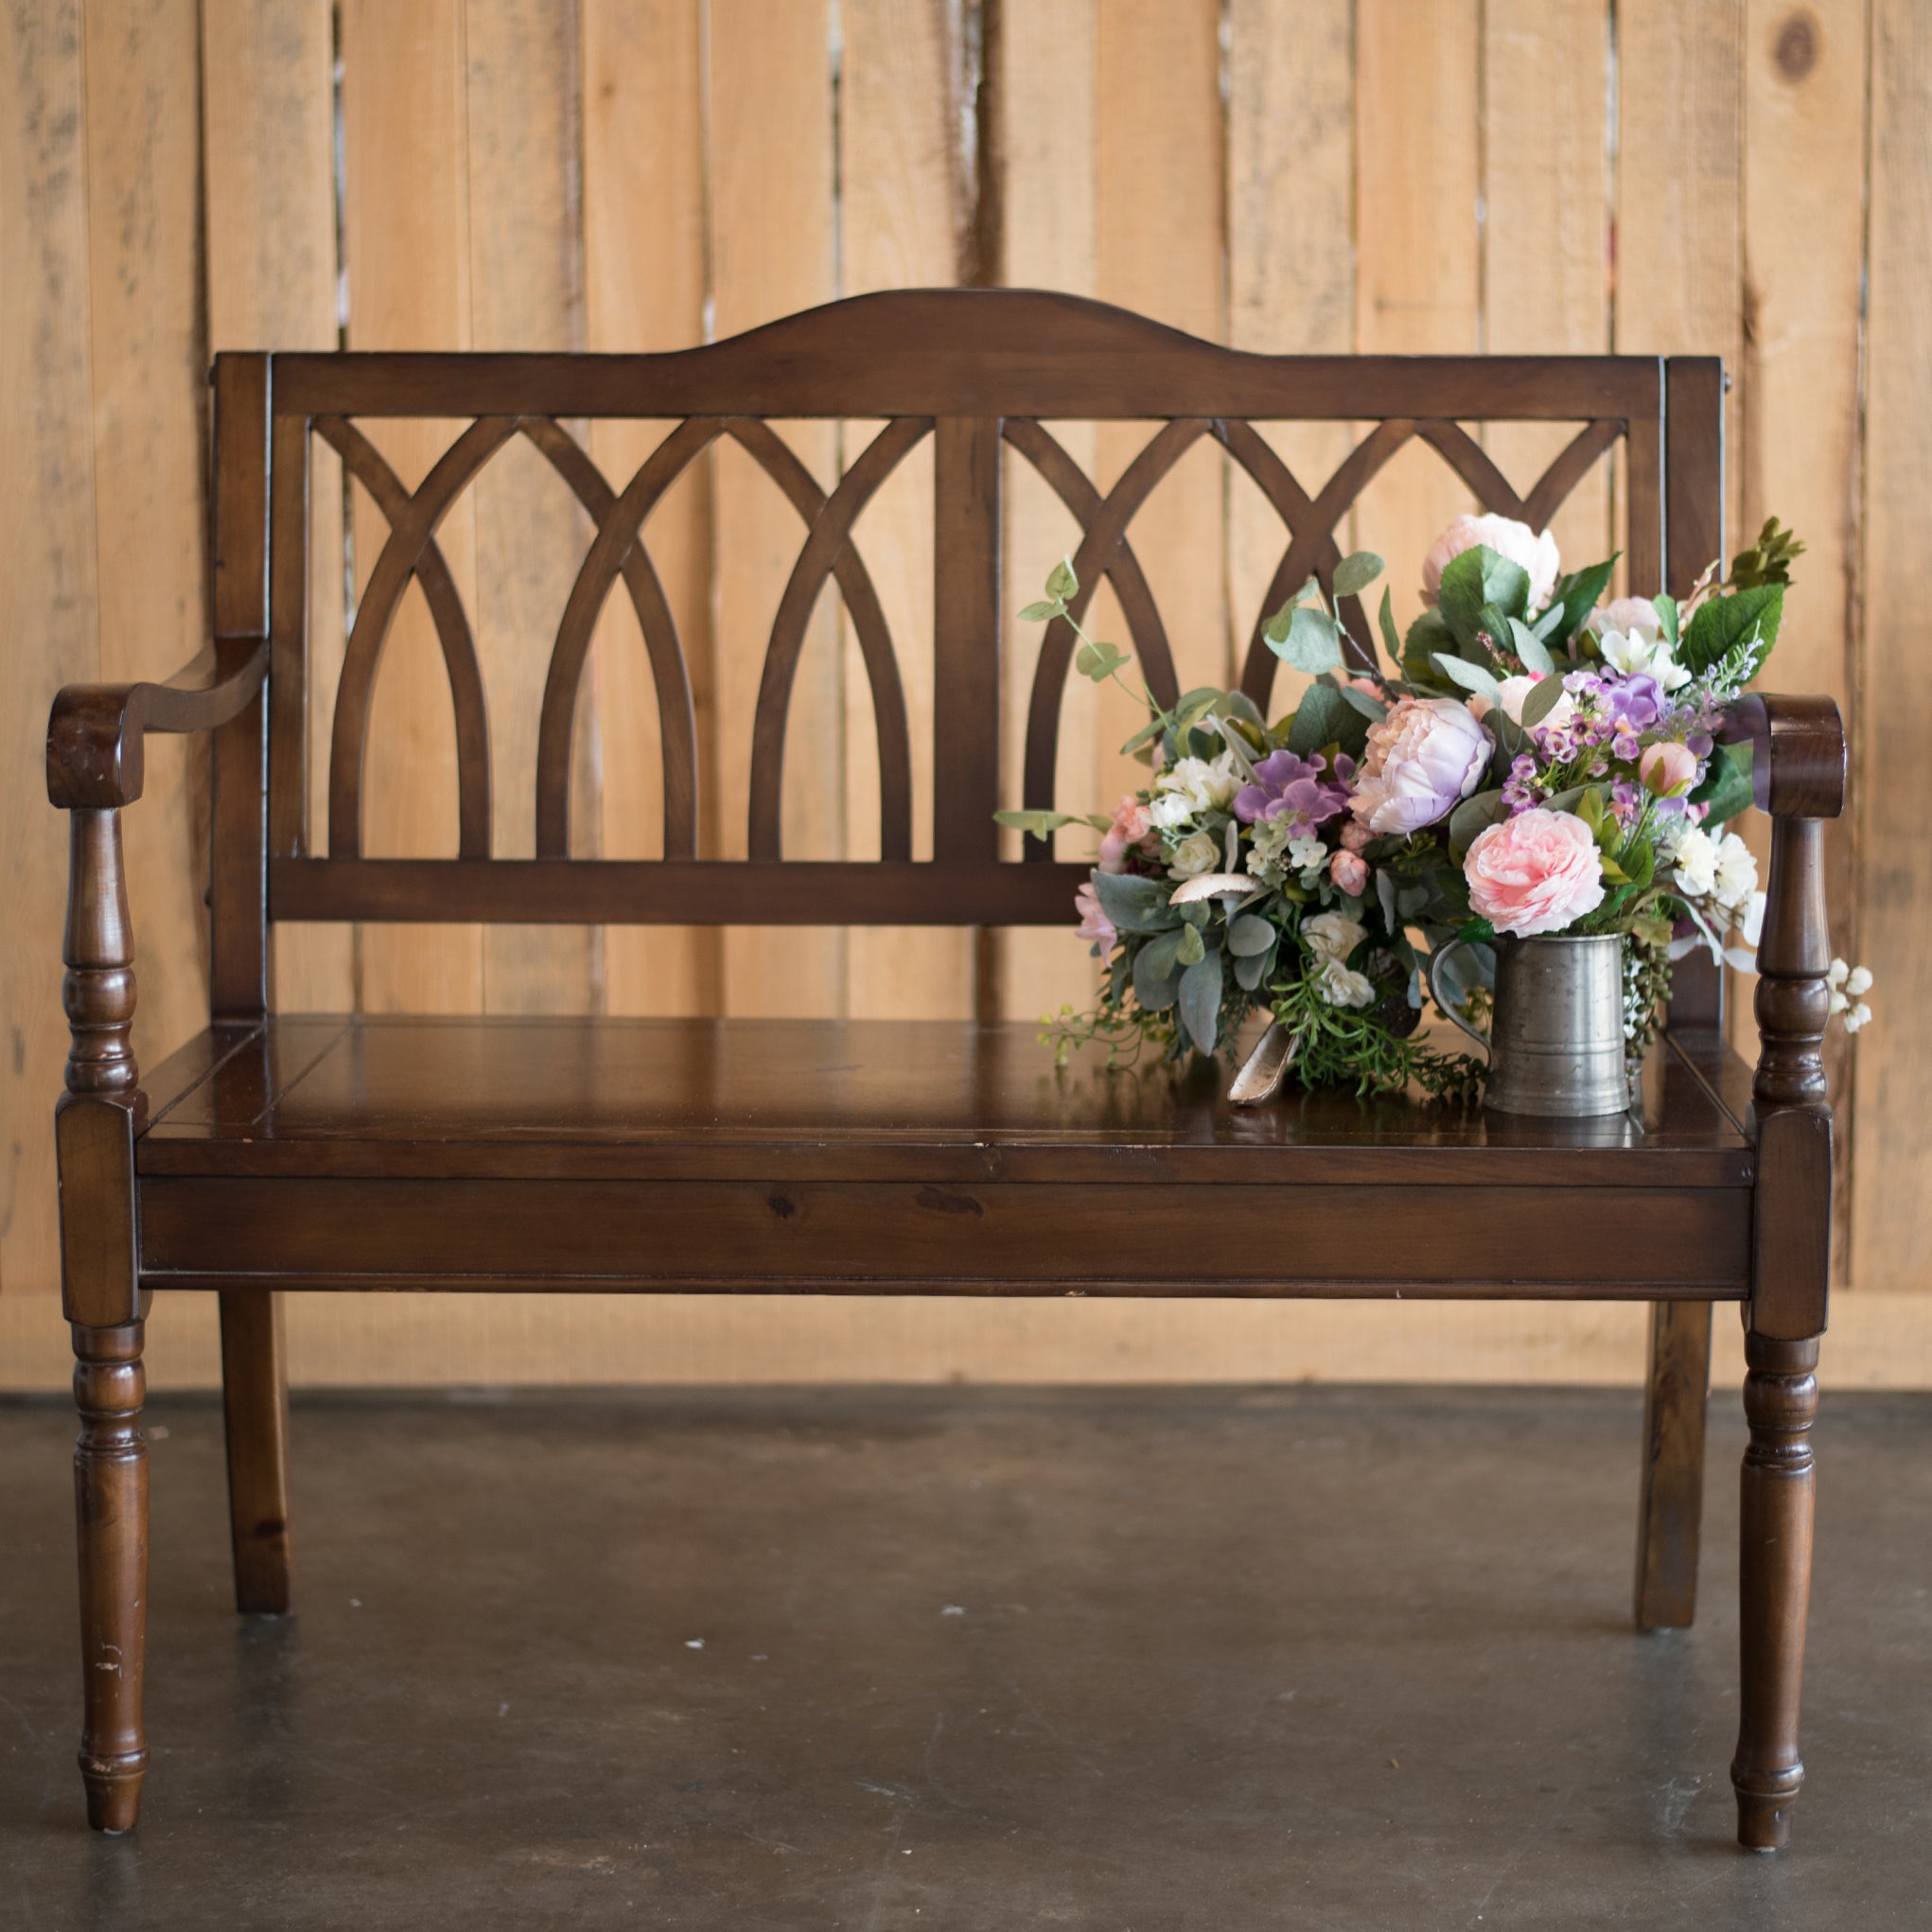 Wooden Sweetheart Bench - The Wedding Shop